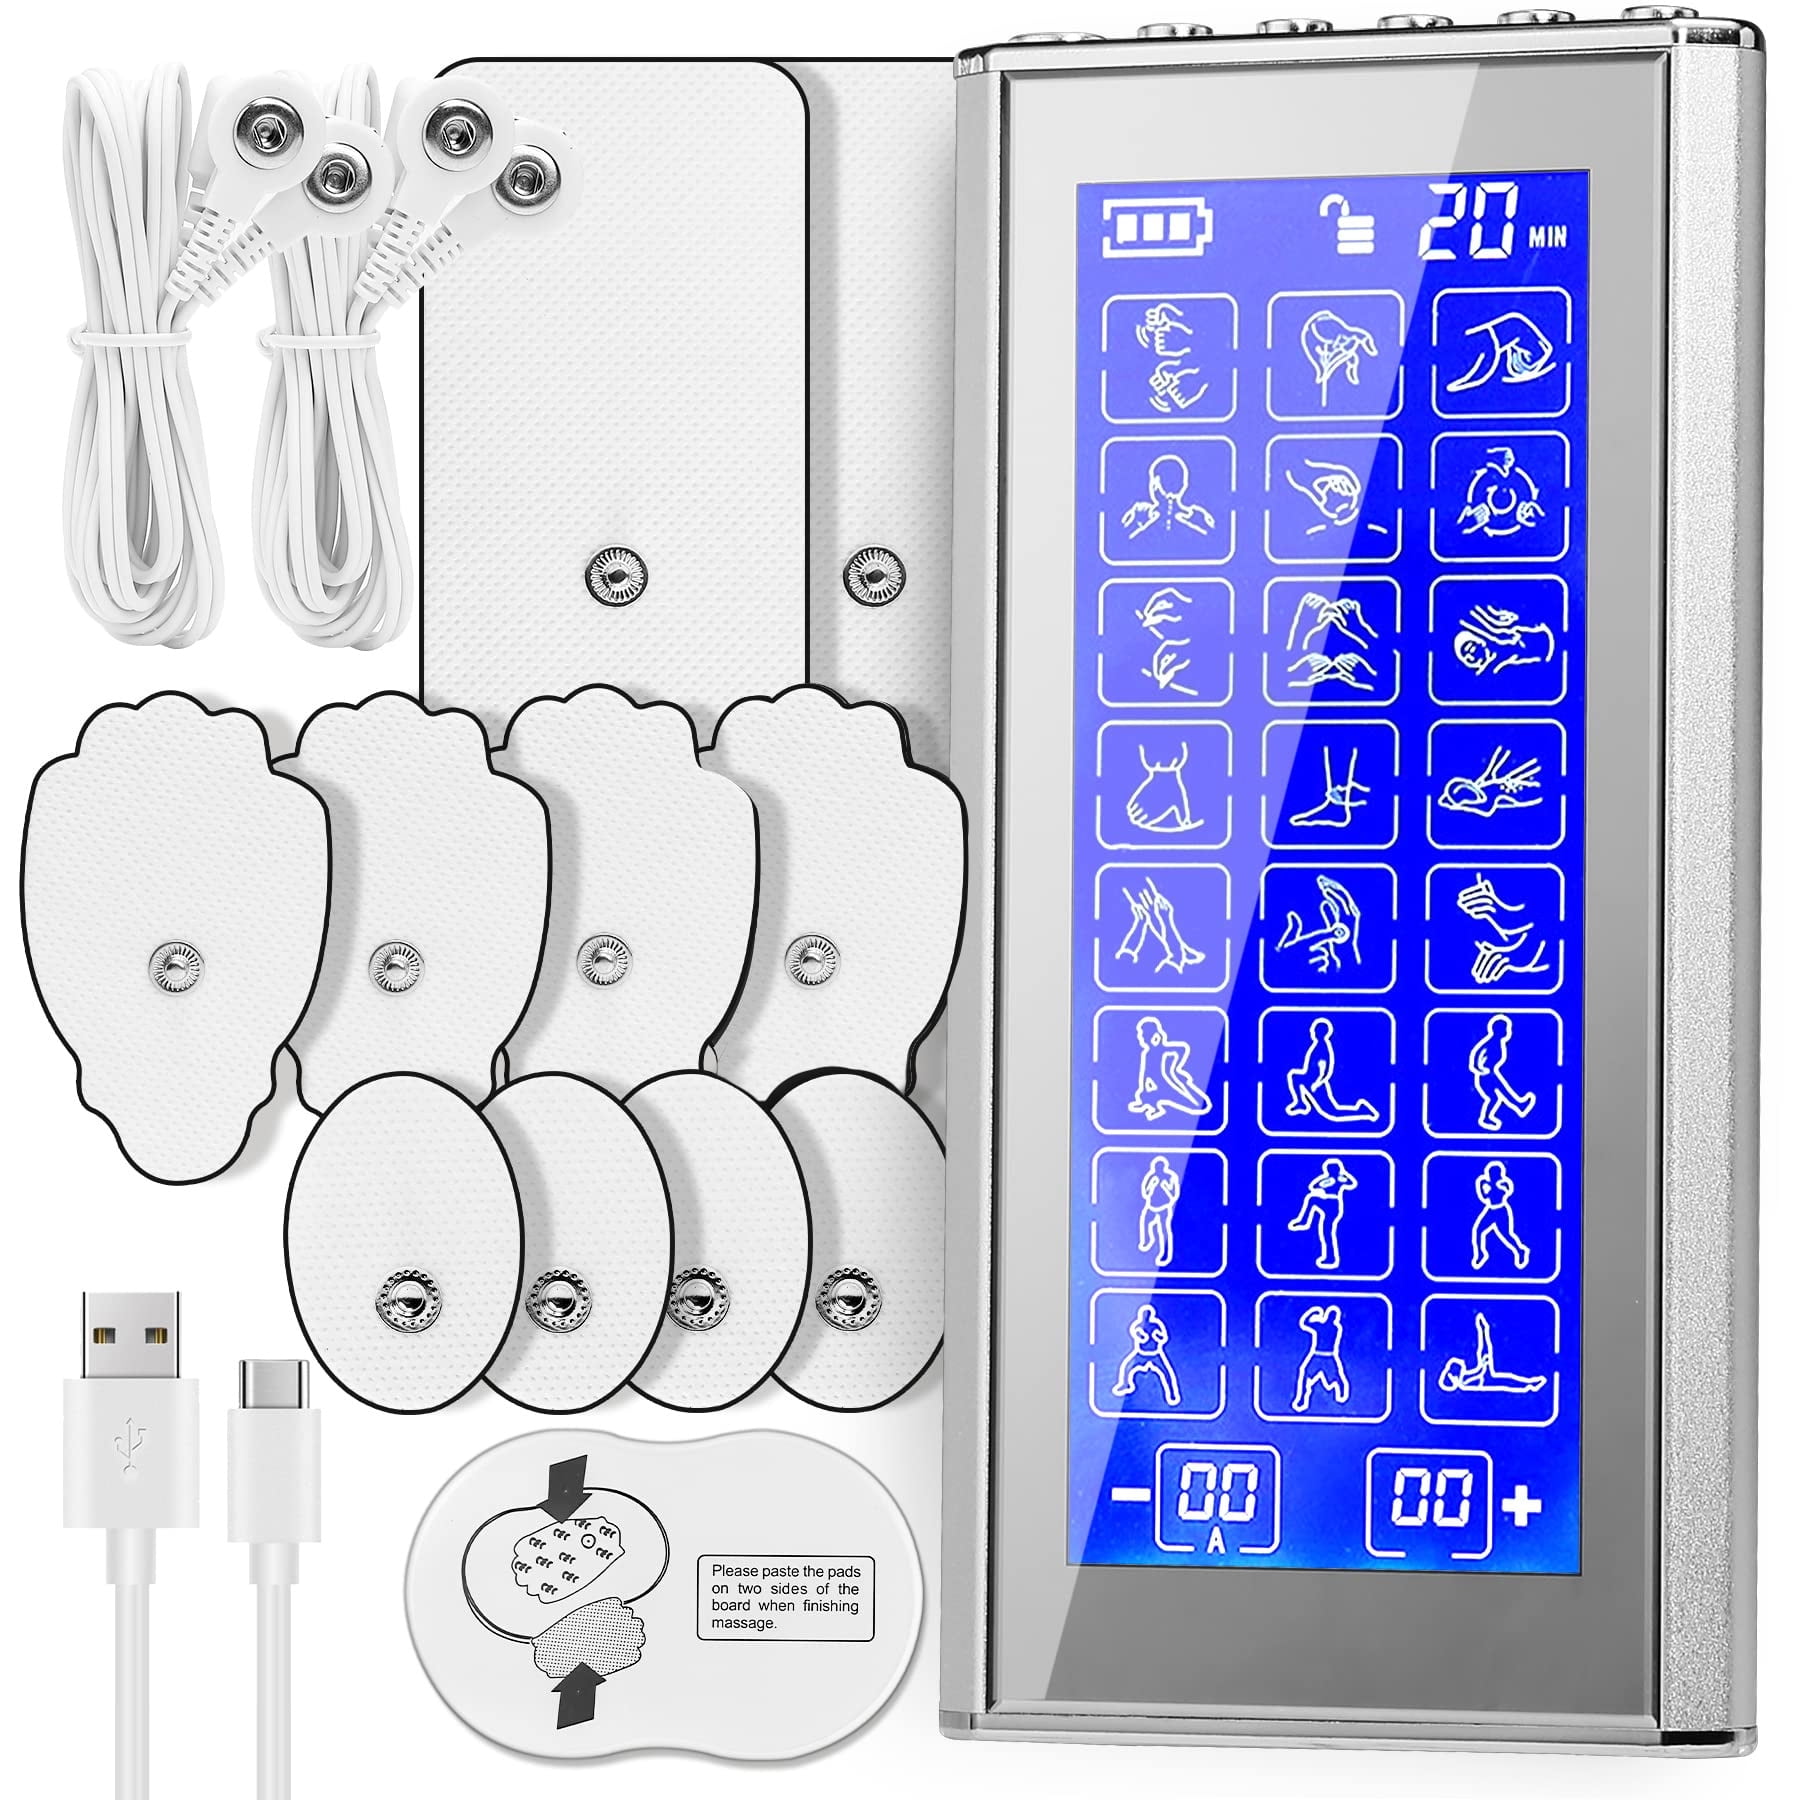  TENKER TENS Unit Muscle Stimulator, 24 Modes TENS EMS Machine  for Pain Relief Therapy/Pain Management, Rechargeable Electronic Pulse  Massager with 2x2 and 2x4 TENS Unit Electrode Pads : Health & Household